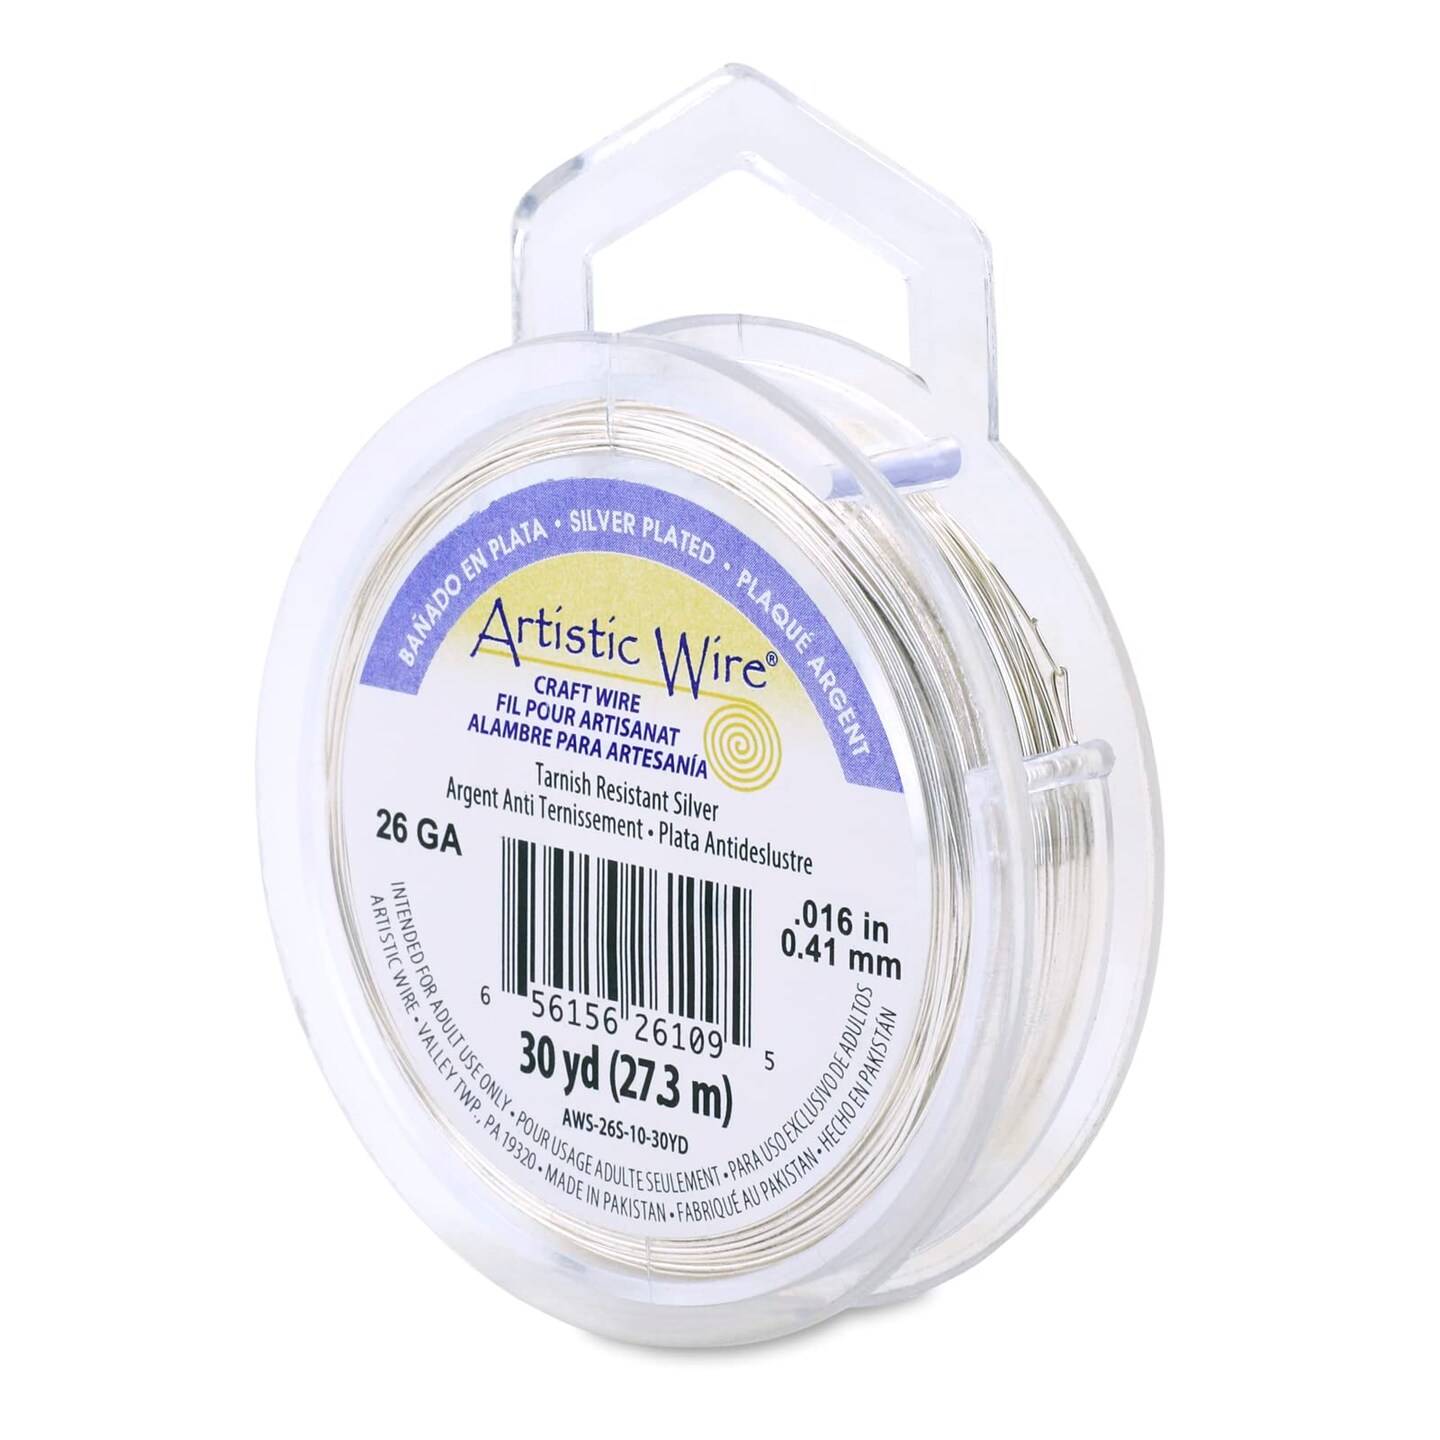 22 Gauge Wire for Making Jewelry, Non Tarnish Wire, Wire Wrapping